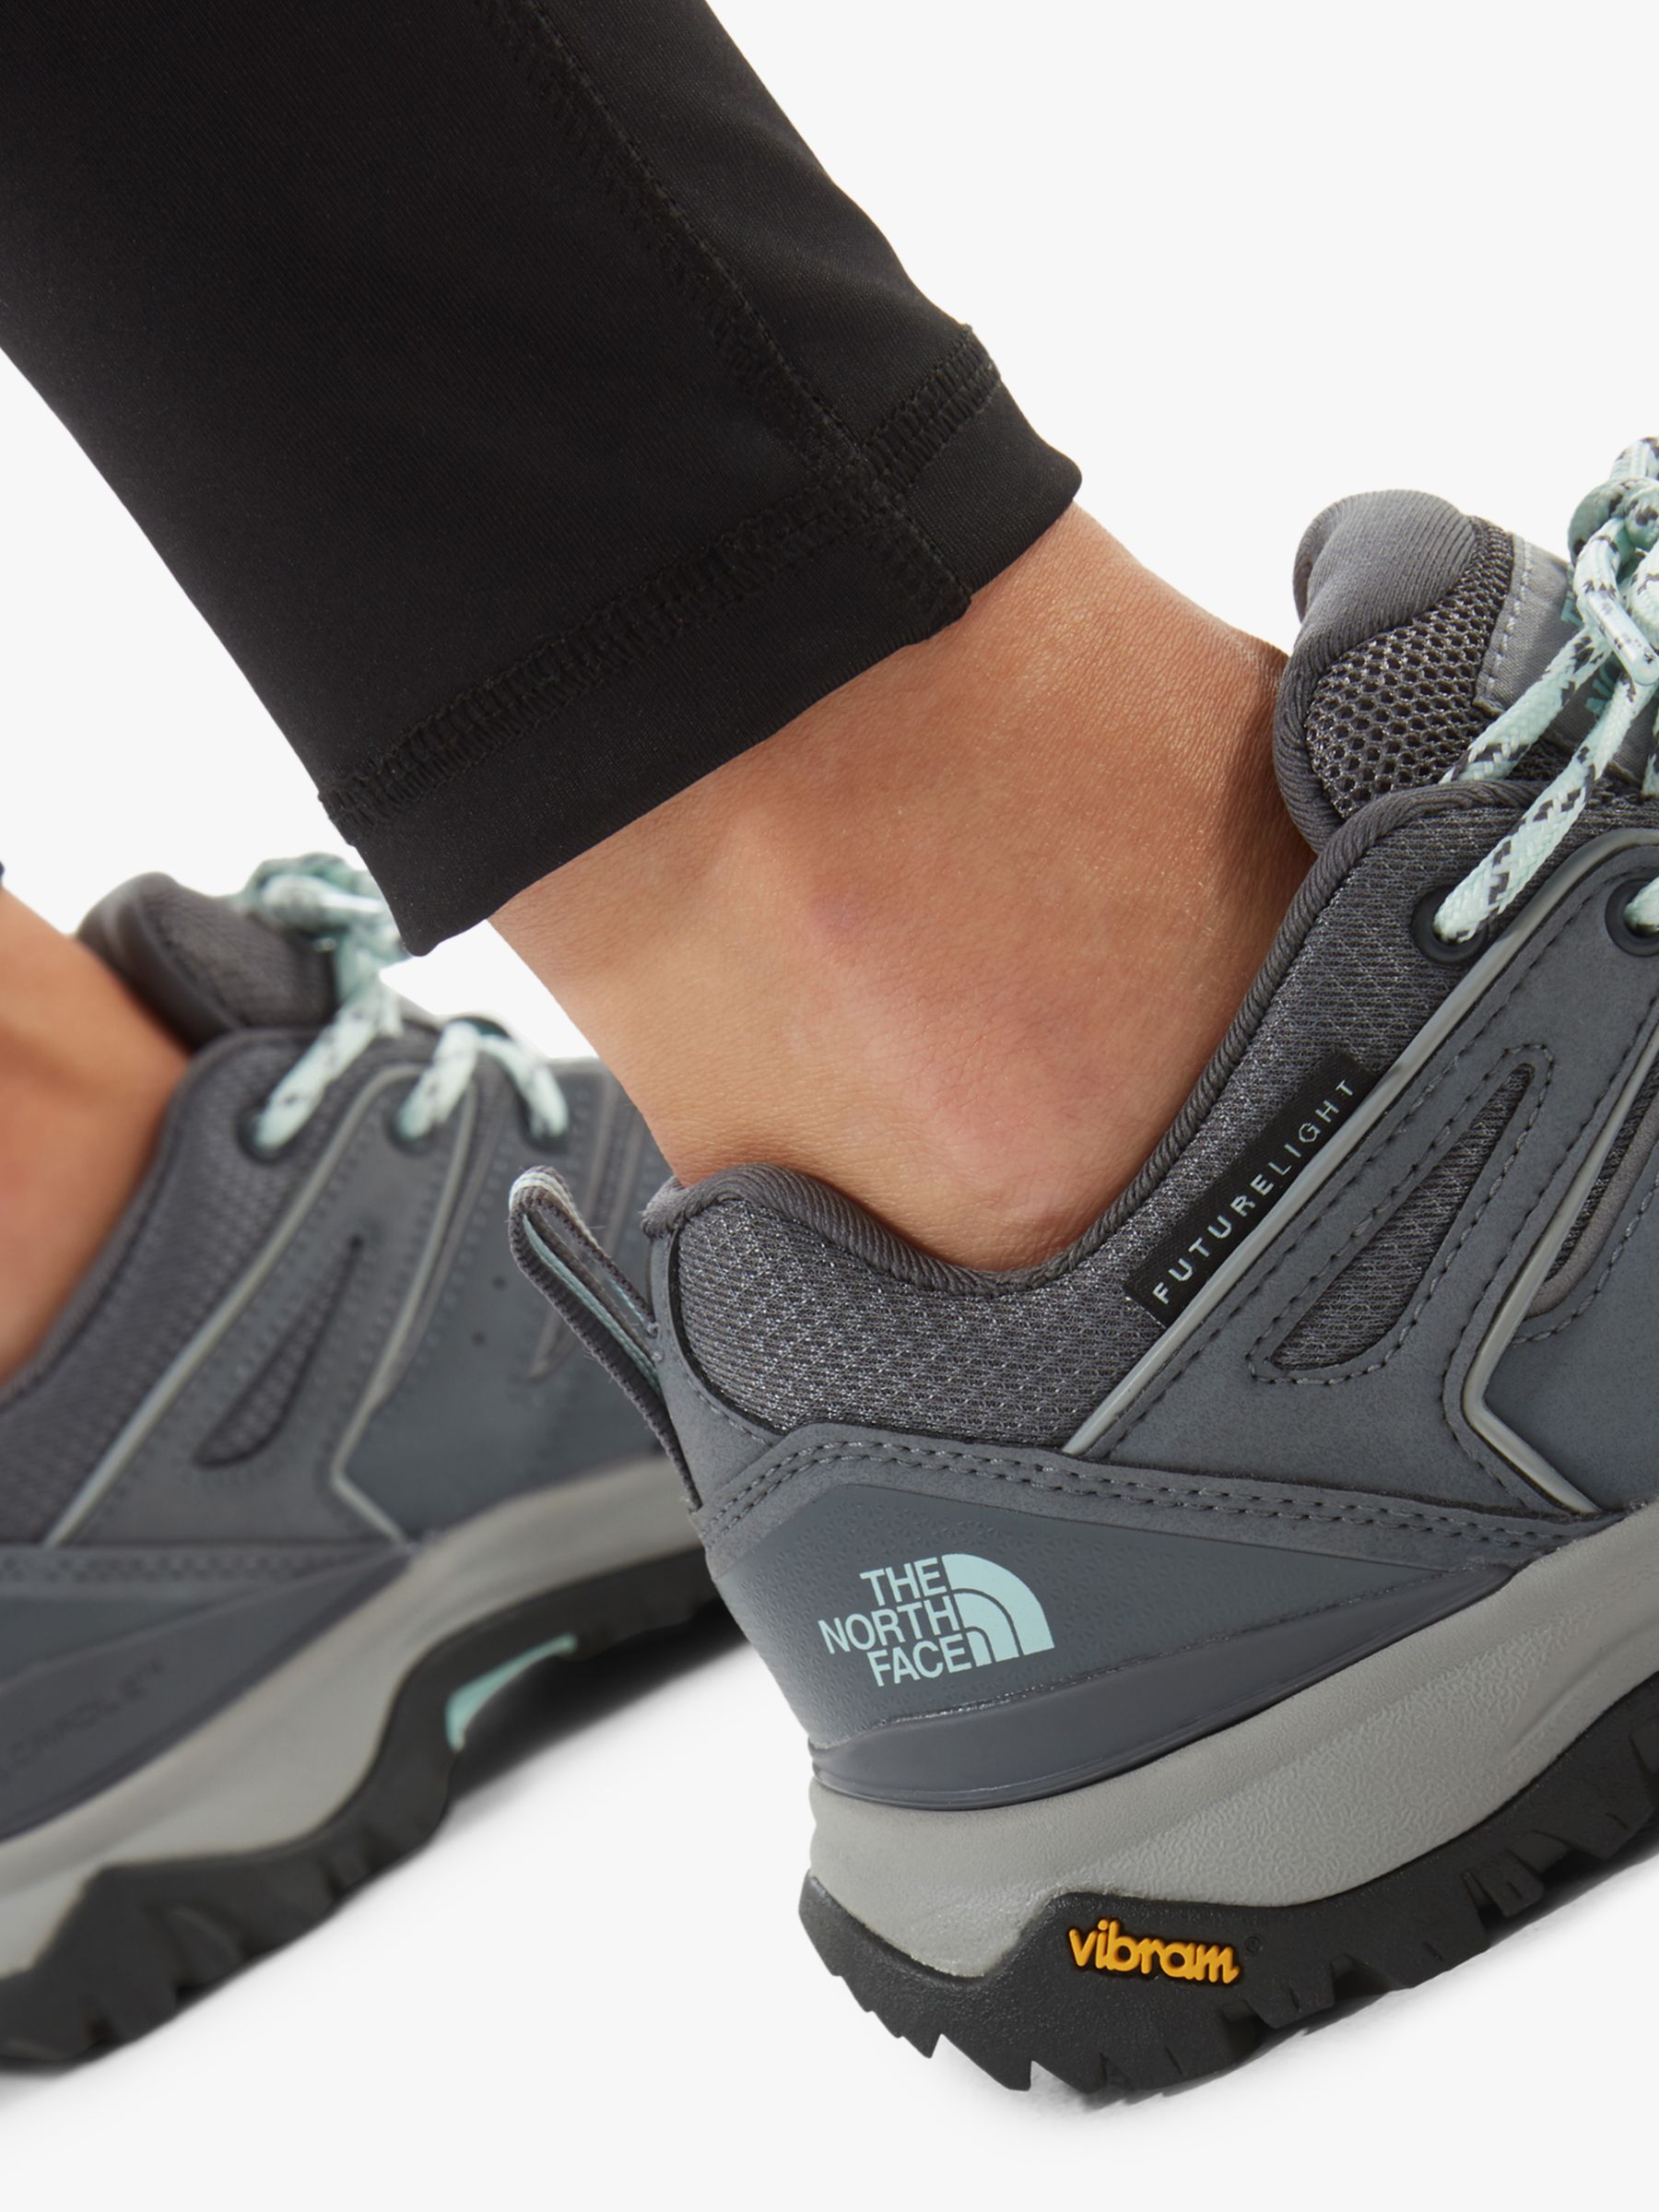 The North Face Hedgehog FUTURELIGHT™ Women's Waterproof Hiking Shoes, Zinc  Grey/Griffin Grey at John Lewis & Partners